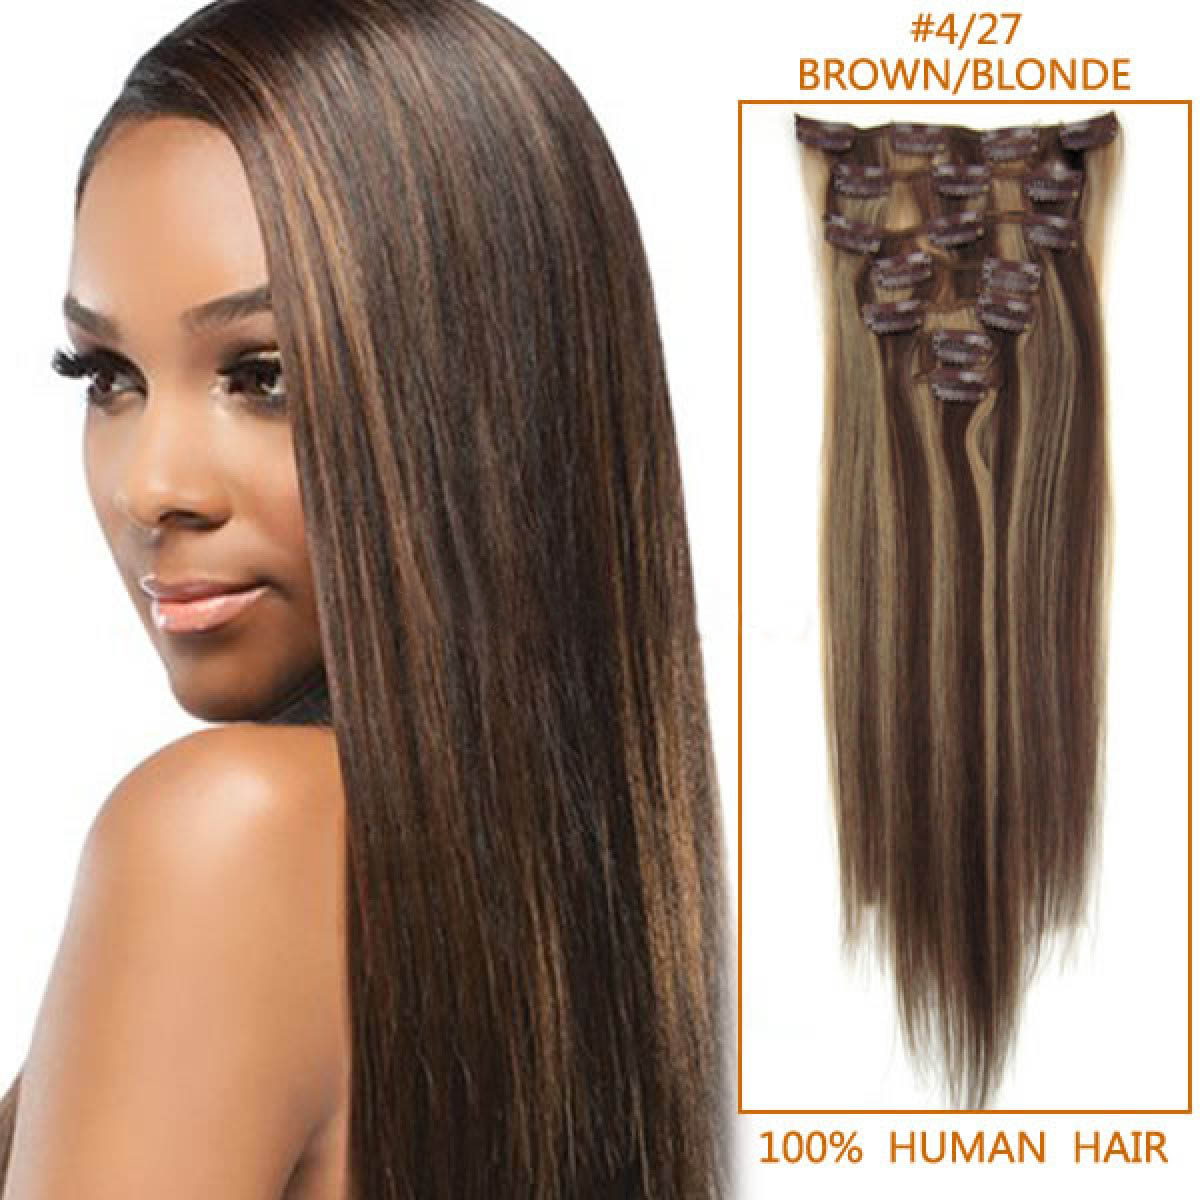 28 Inch 4 27 Brown Blonde Clip In Human Hair Extensions 8pcs